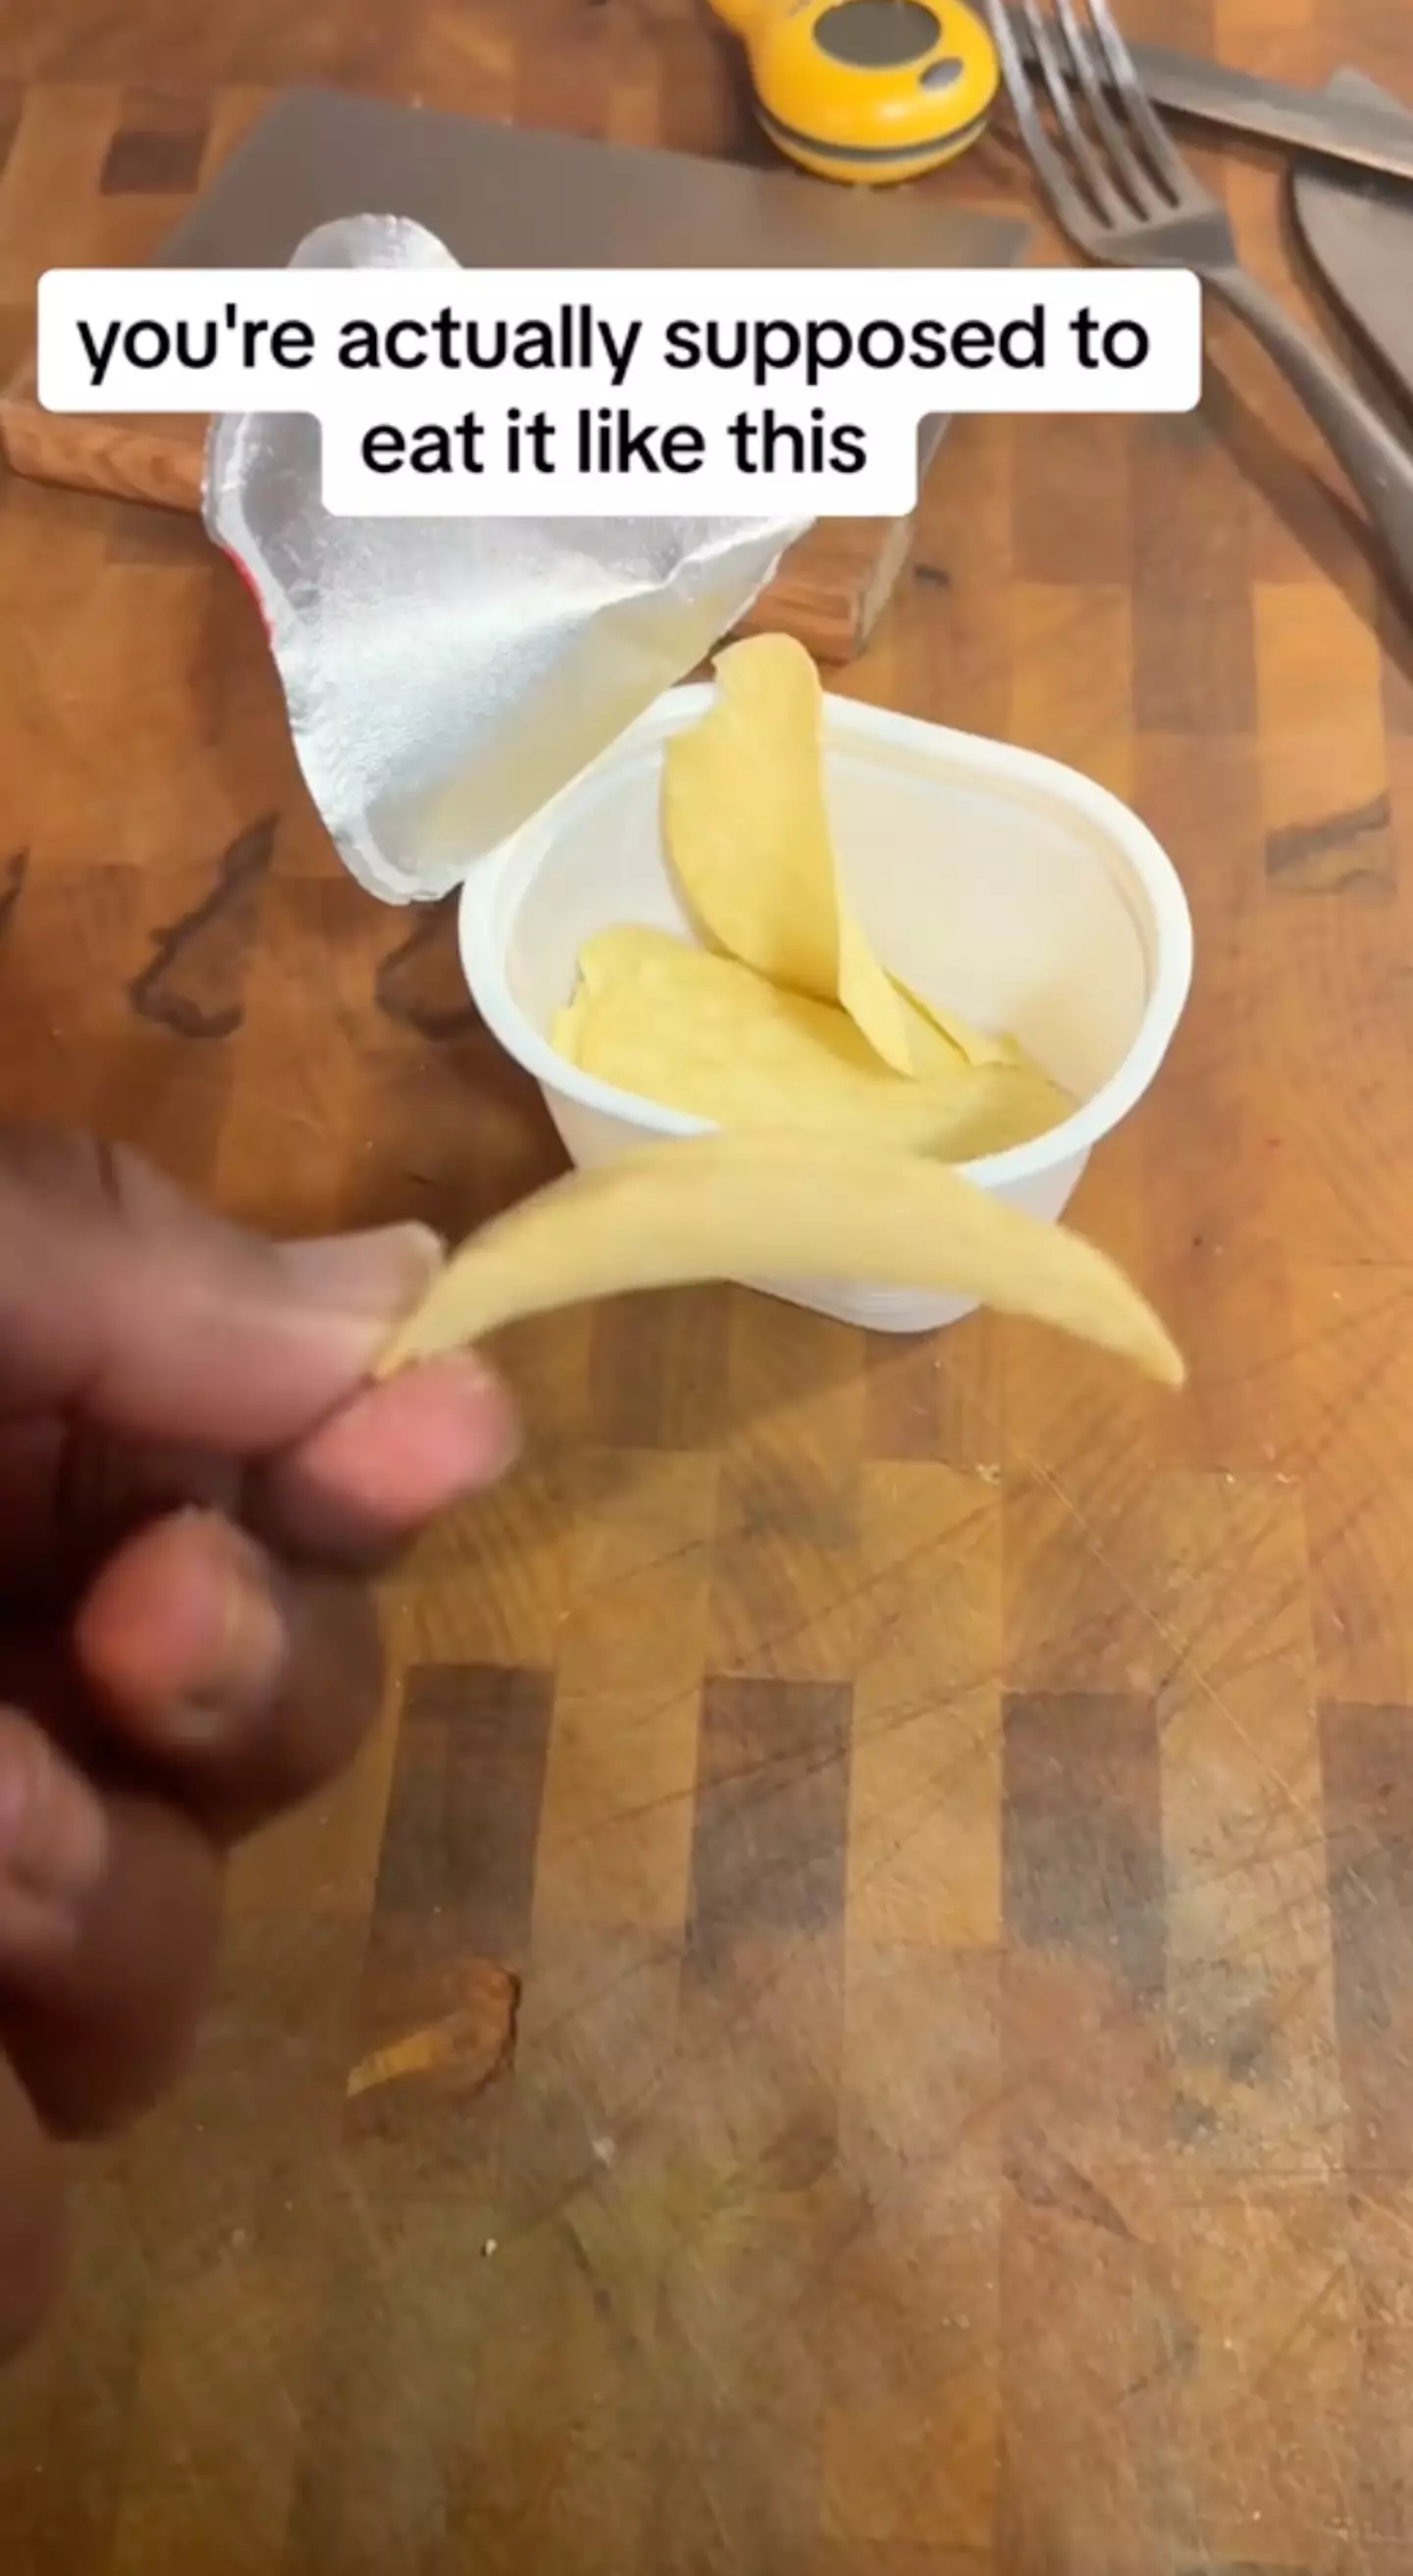 There is a 'correct' way to eat Pringles.